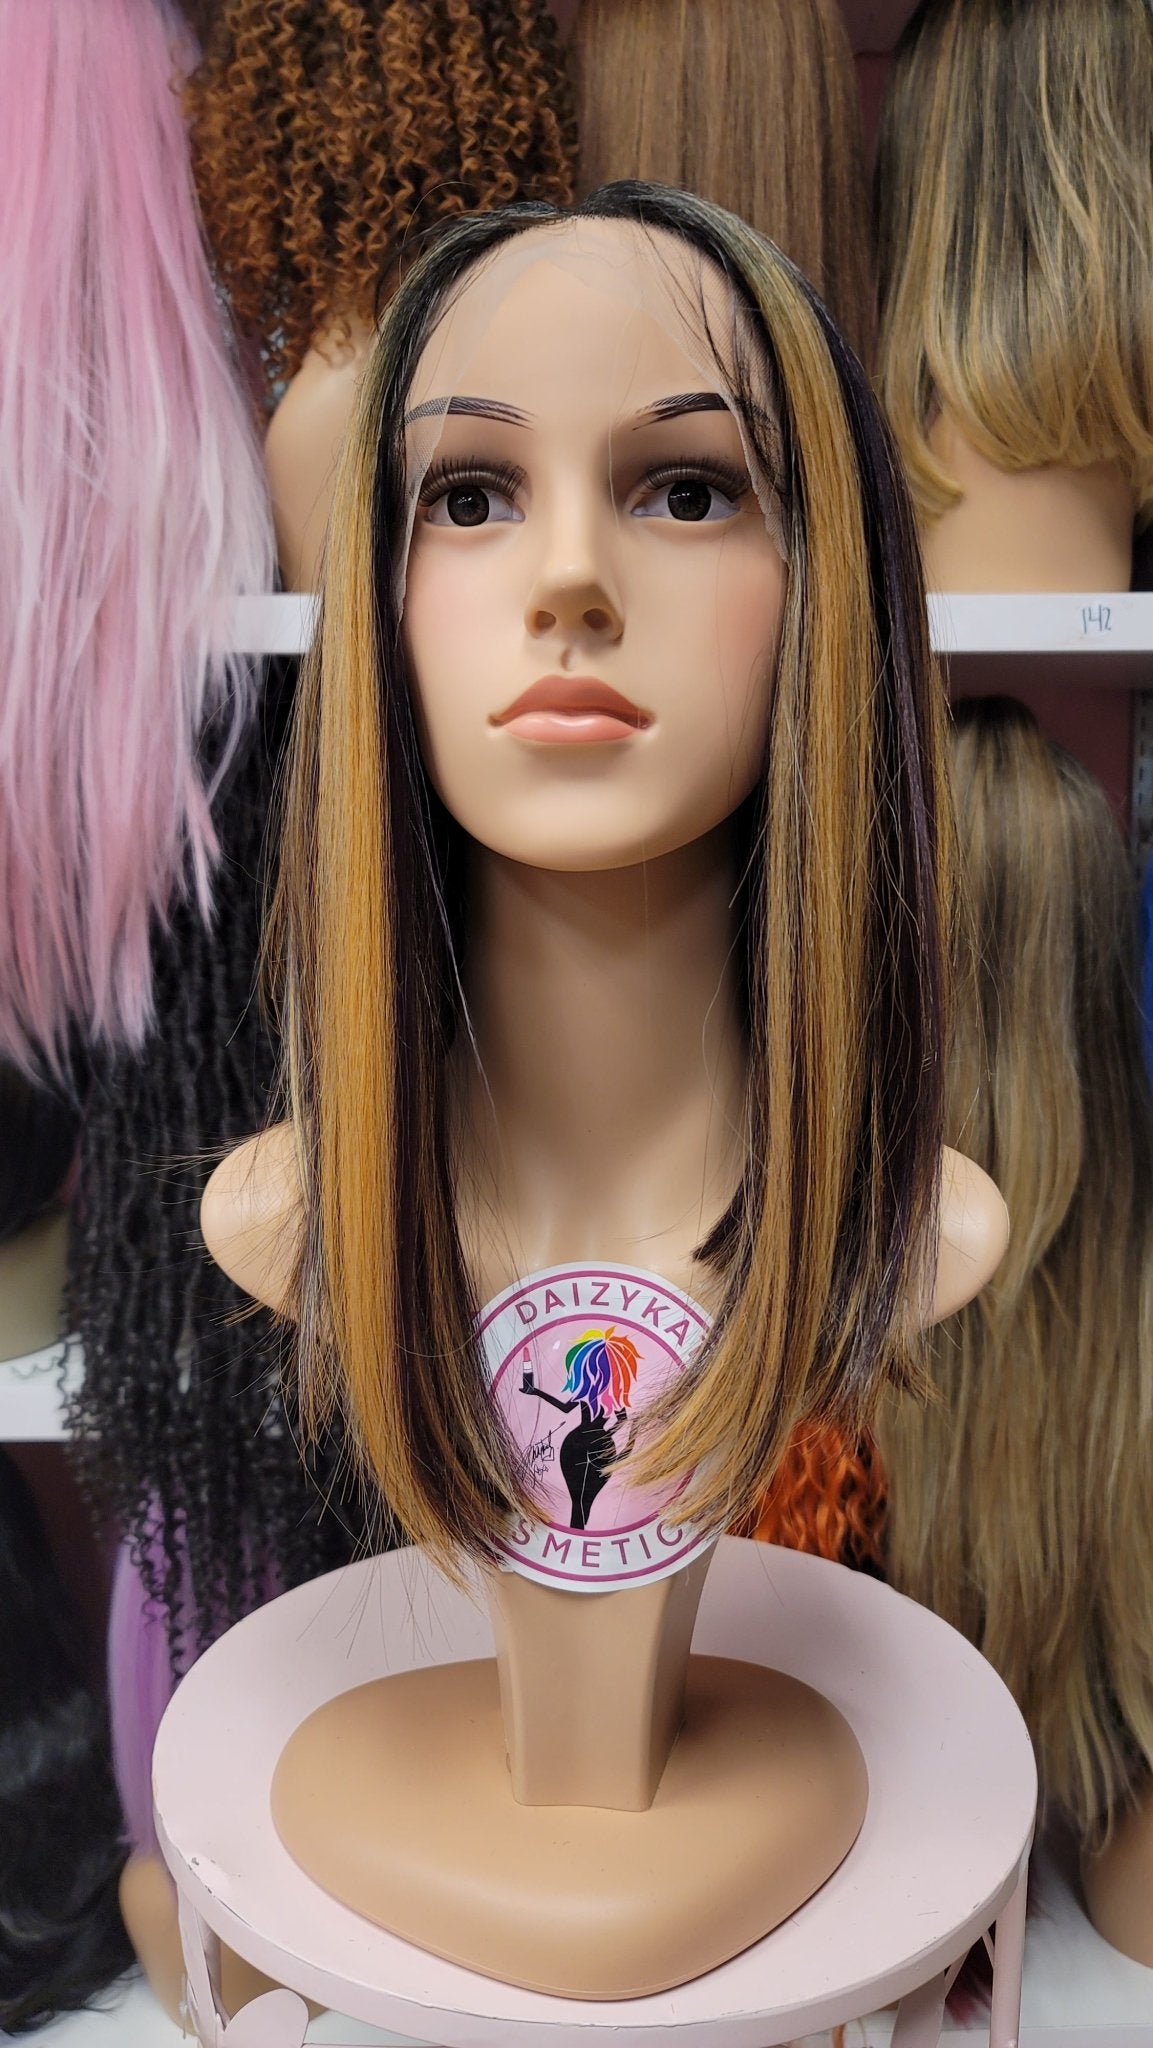 172 Tokyo - Middle Part Lace Front Wig - 1B/GOLDEN BLD - DaizyKat Cosmetics 172 Tokyo - Middle Part Lace Front Wig - 1B/GOLDEN BLD DaizyKat Cosmetics Wigs